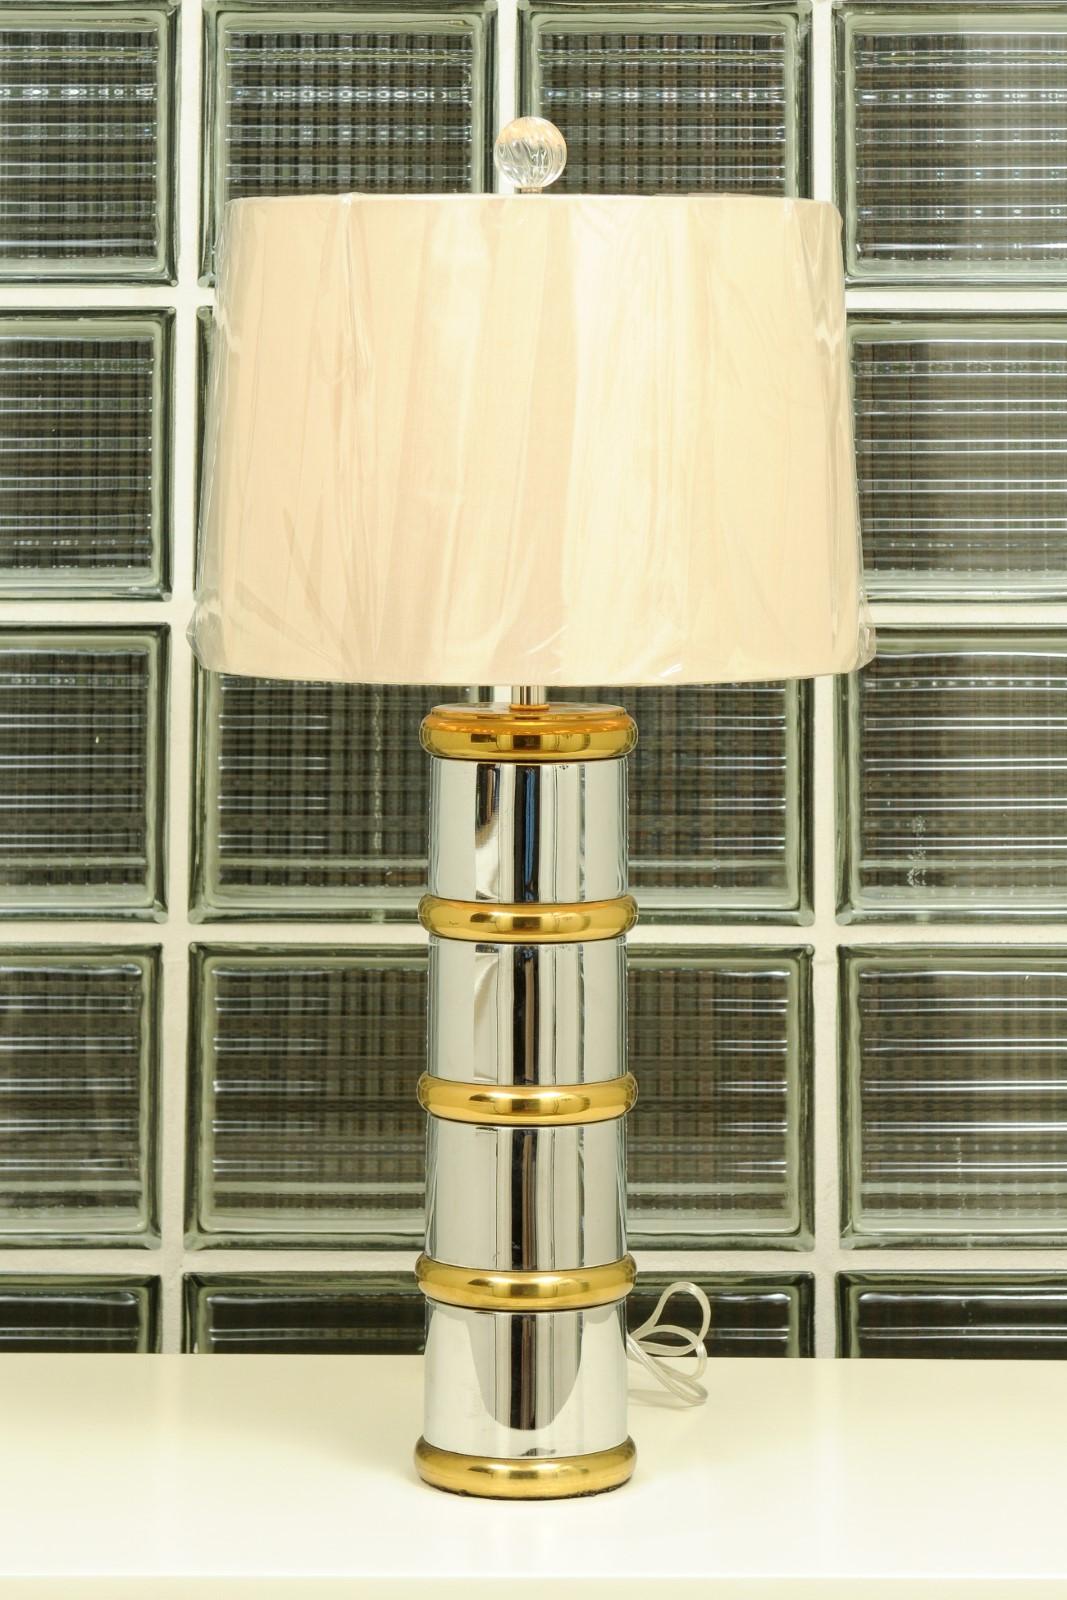 These magnificent lamps are shipped as photographed and described, complete with new shades, harps and finials. Completely Installation Ready.

A stellar pair of stylish faux-bamboo lamps in chrome and brass, circa 1970. Beautiful detail, weight